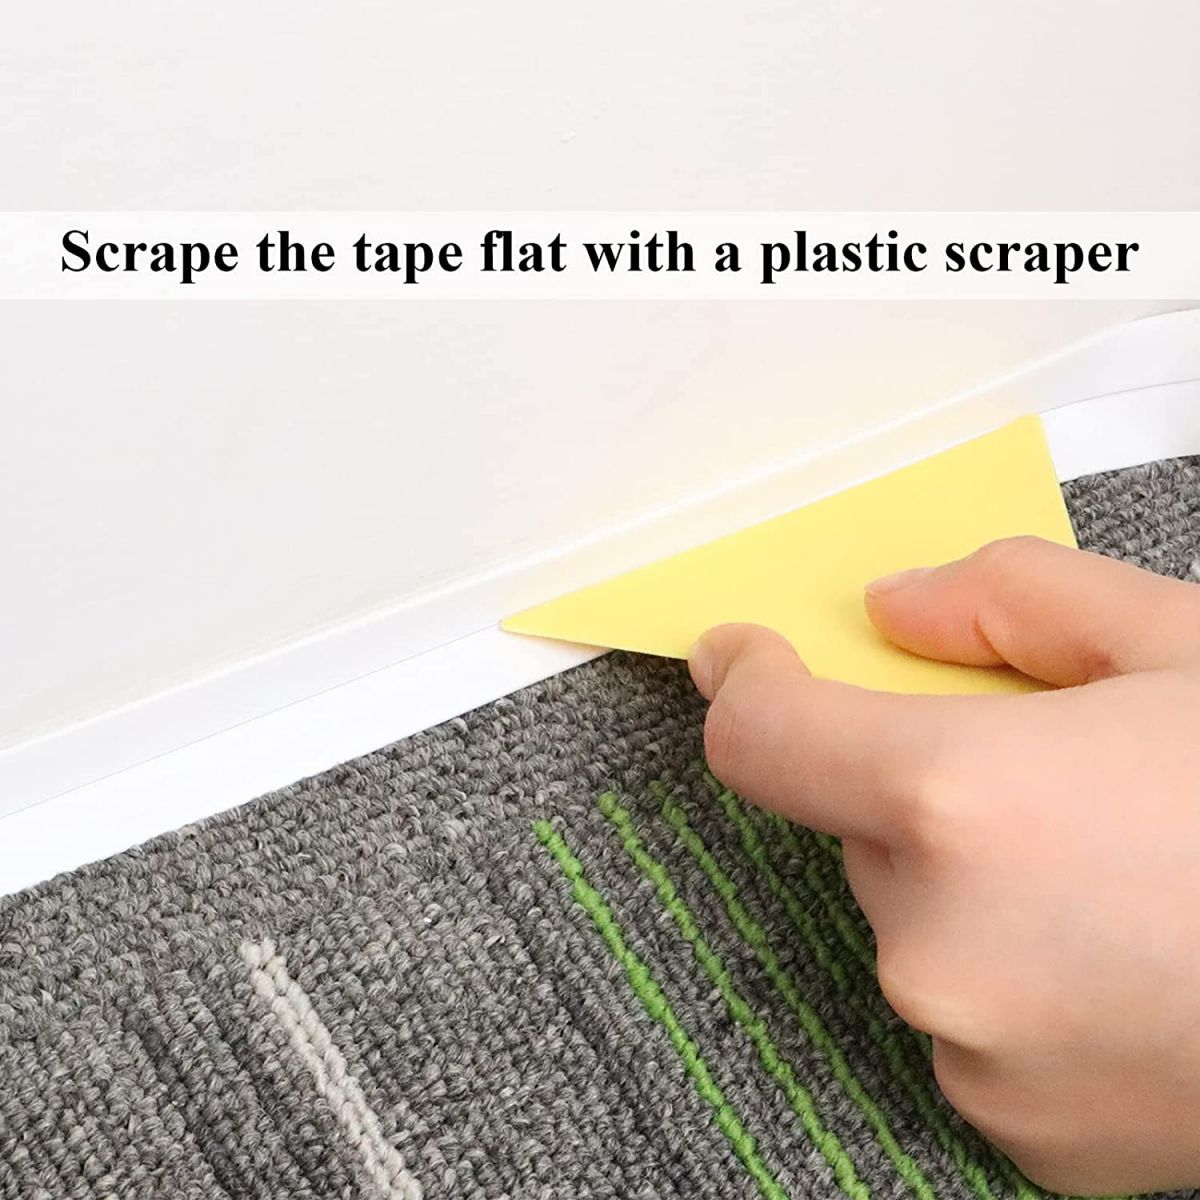 Self Adhesive Waterproof Tape Sealing Tape with Installation Tool (White, 320cm x 2.2cm)